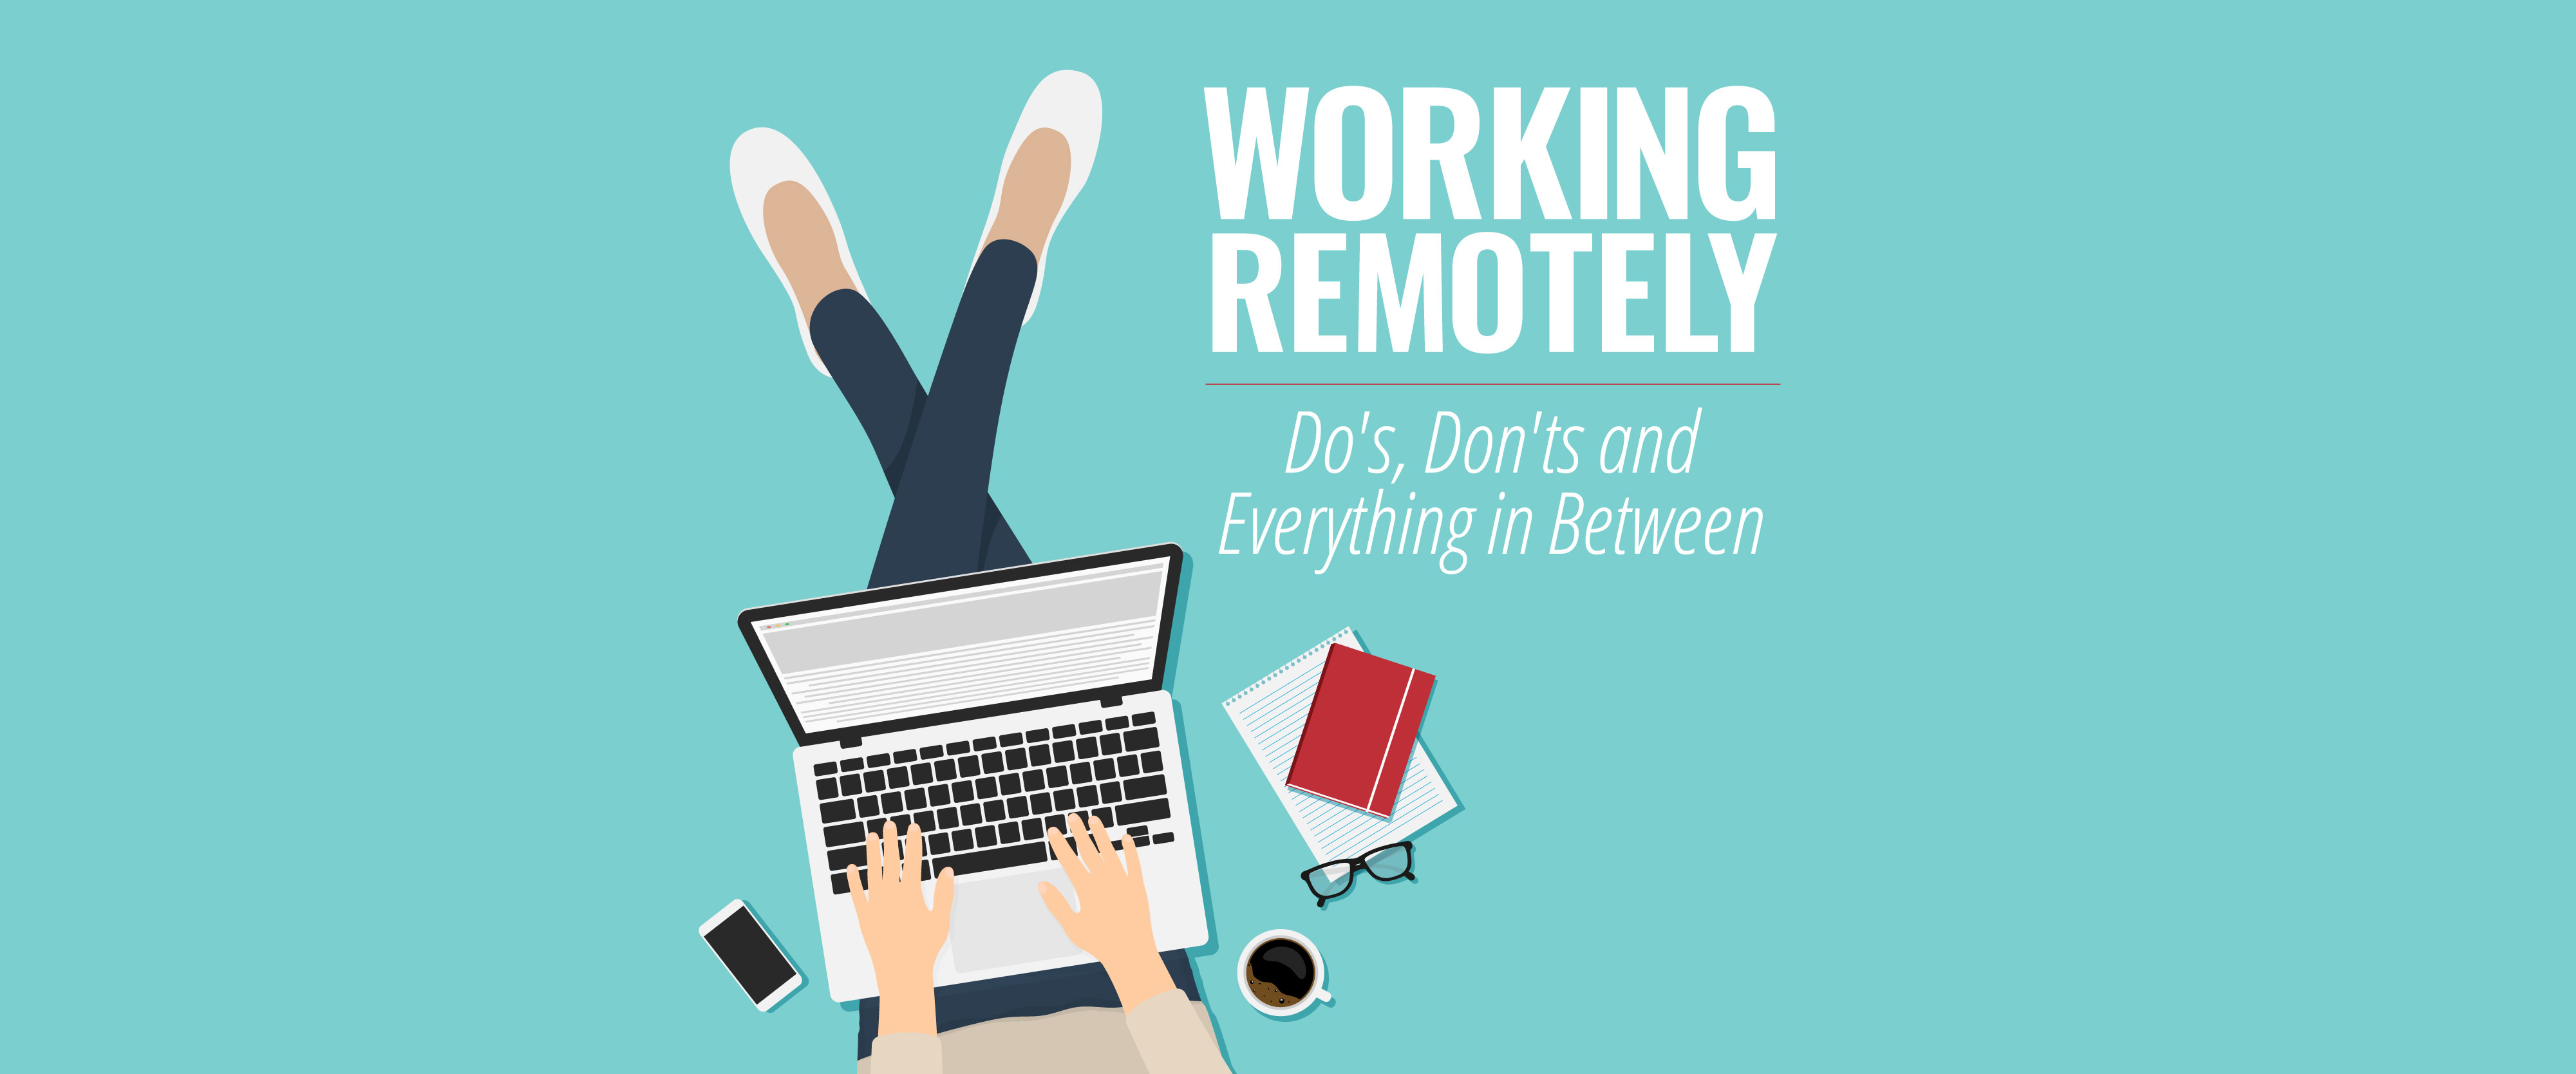 i am working remotely meaning